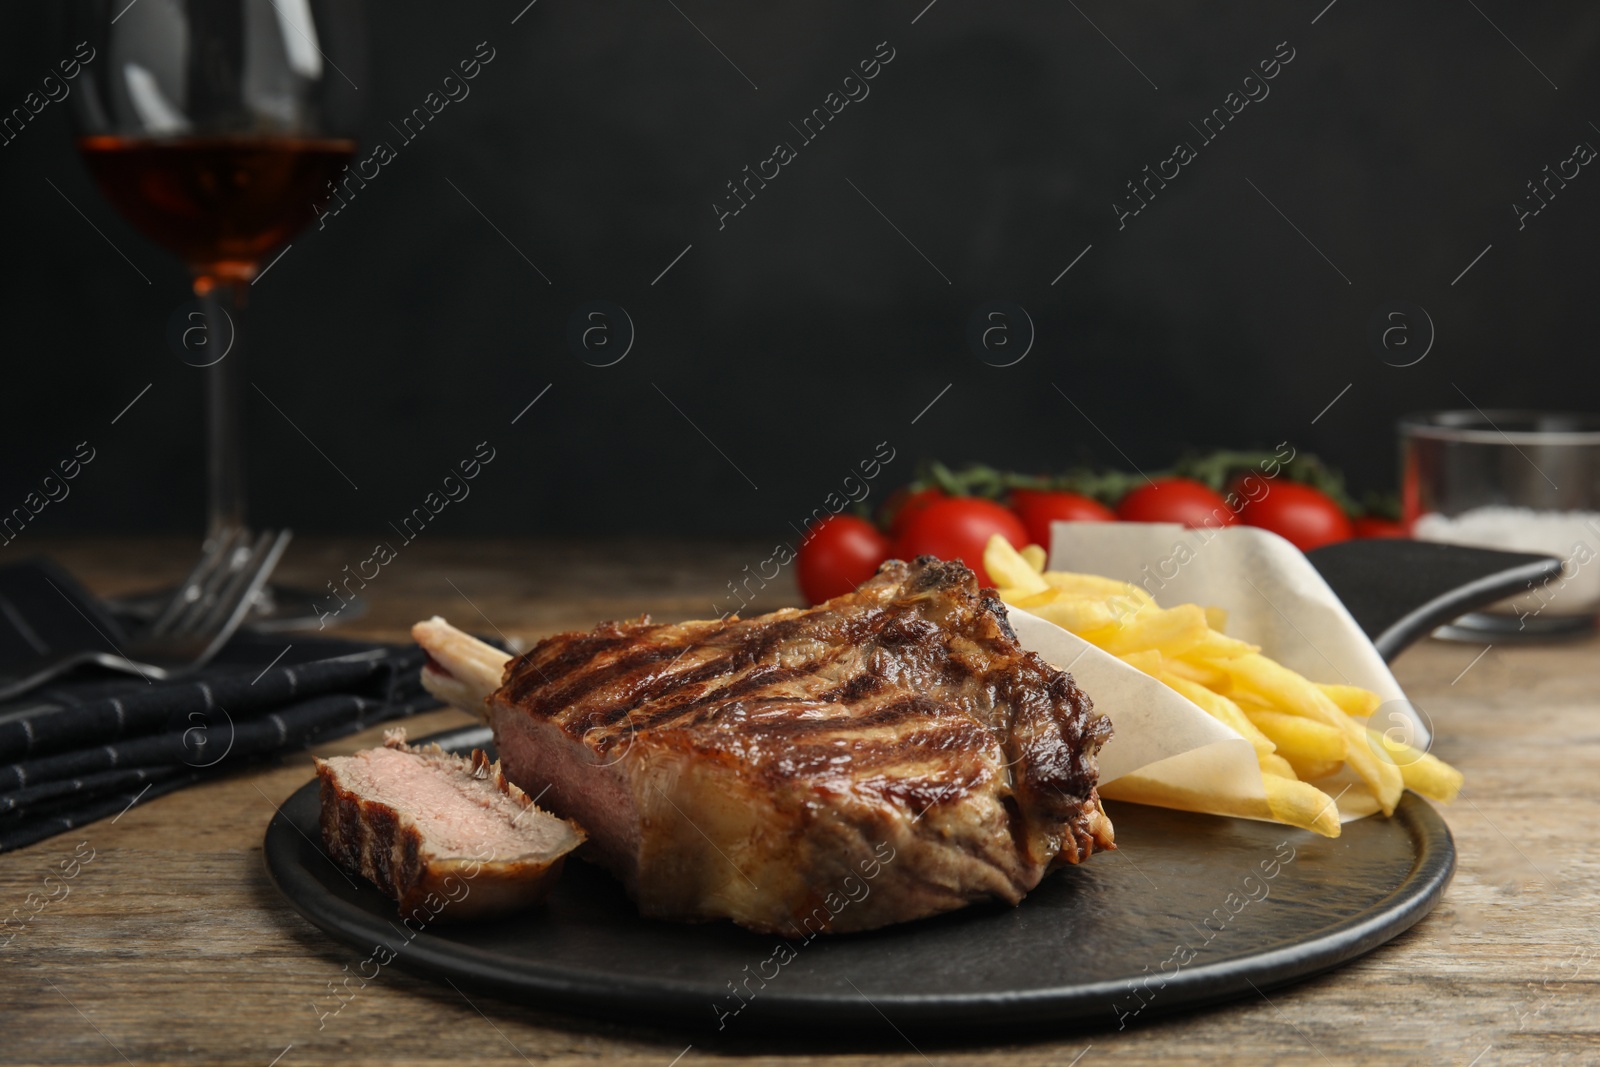 Photo of Tasty grilled beef steak and French fries on wooden table